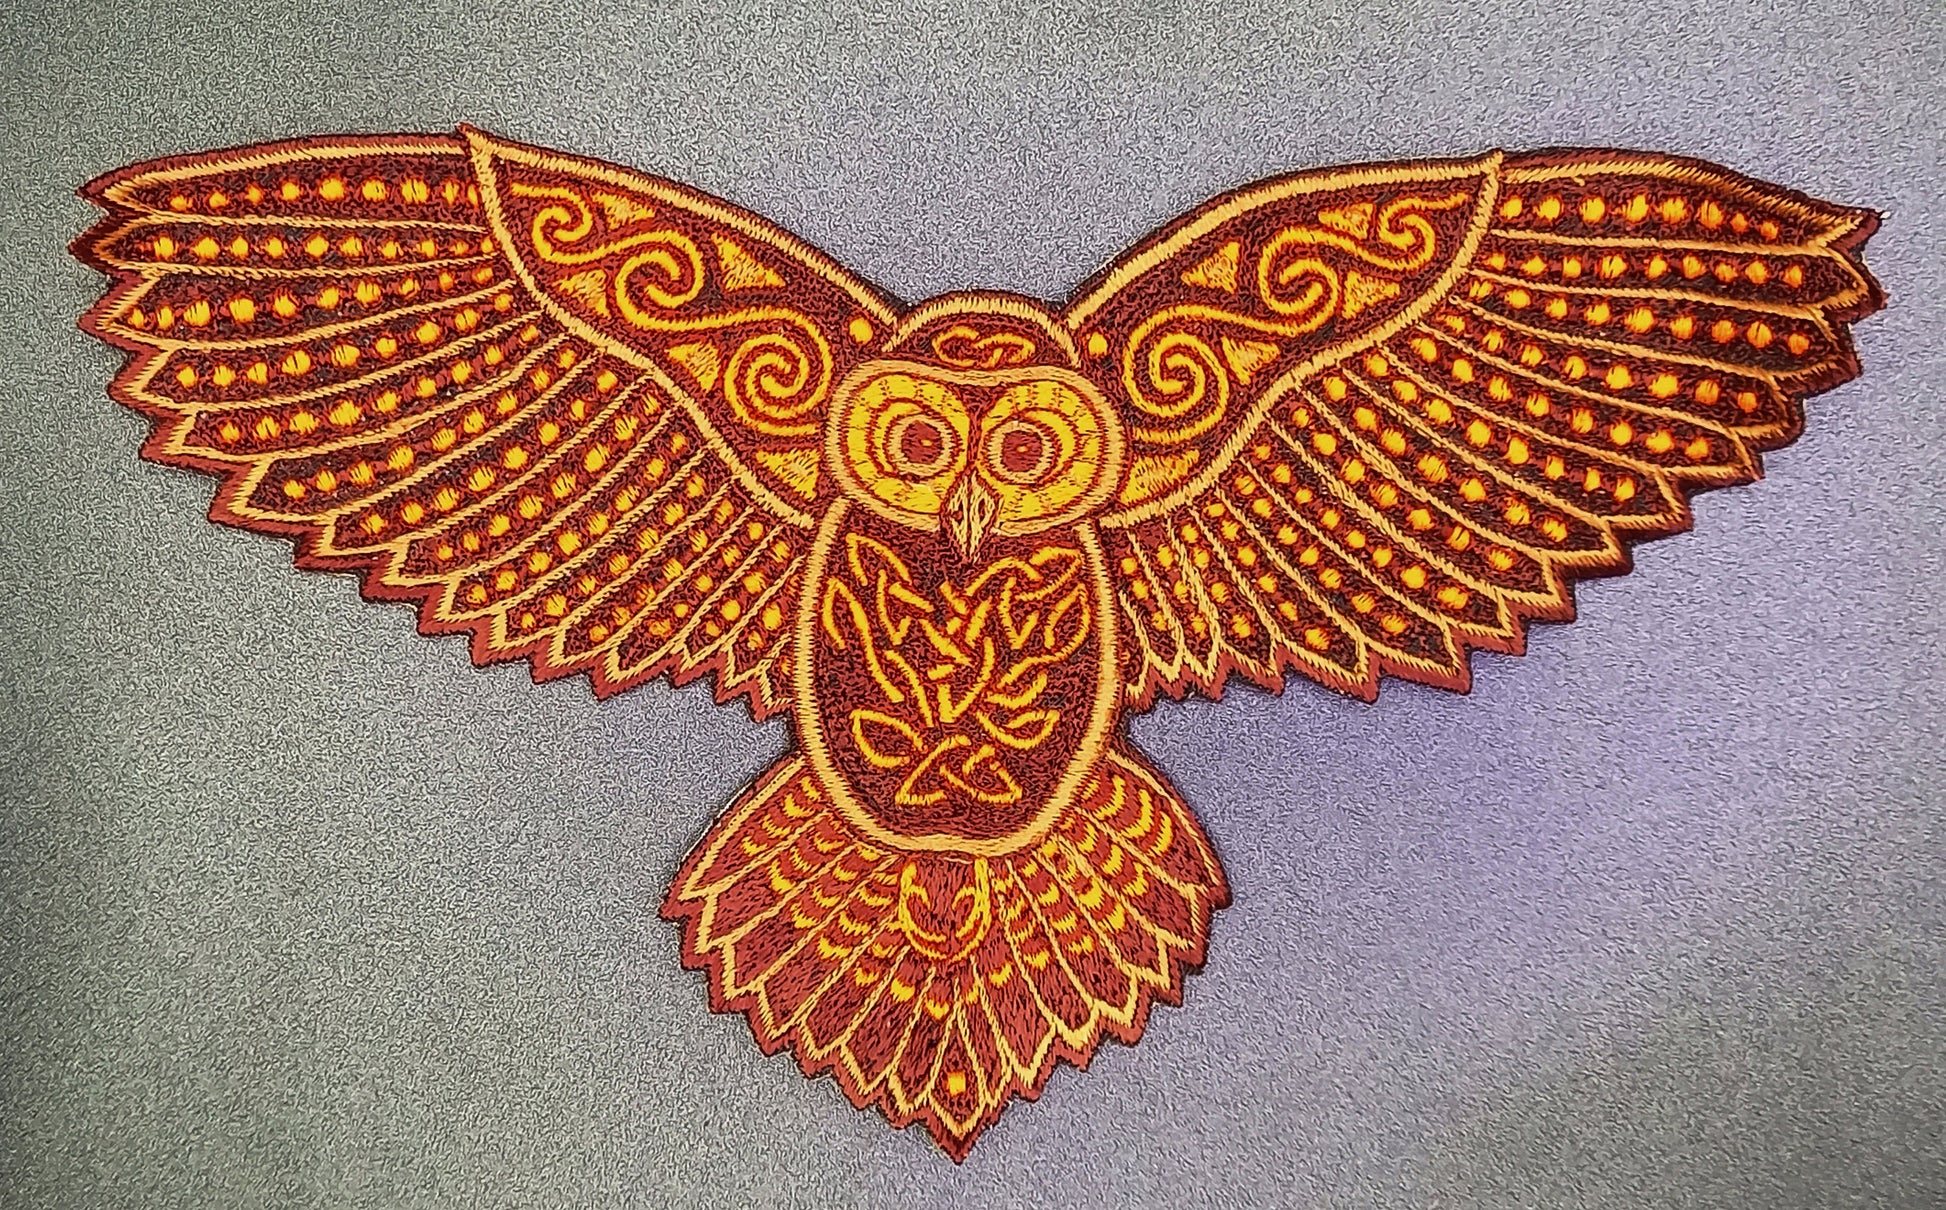 Celtic Owl Patch Embroidery with blacklight glowing UV colors - beautiful owl flies high and watches through the night of the magic forest